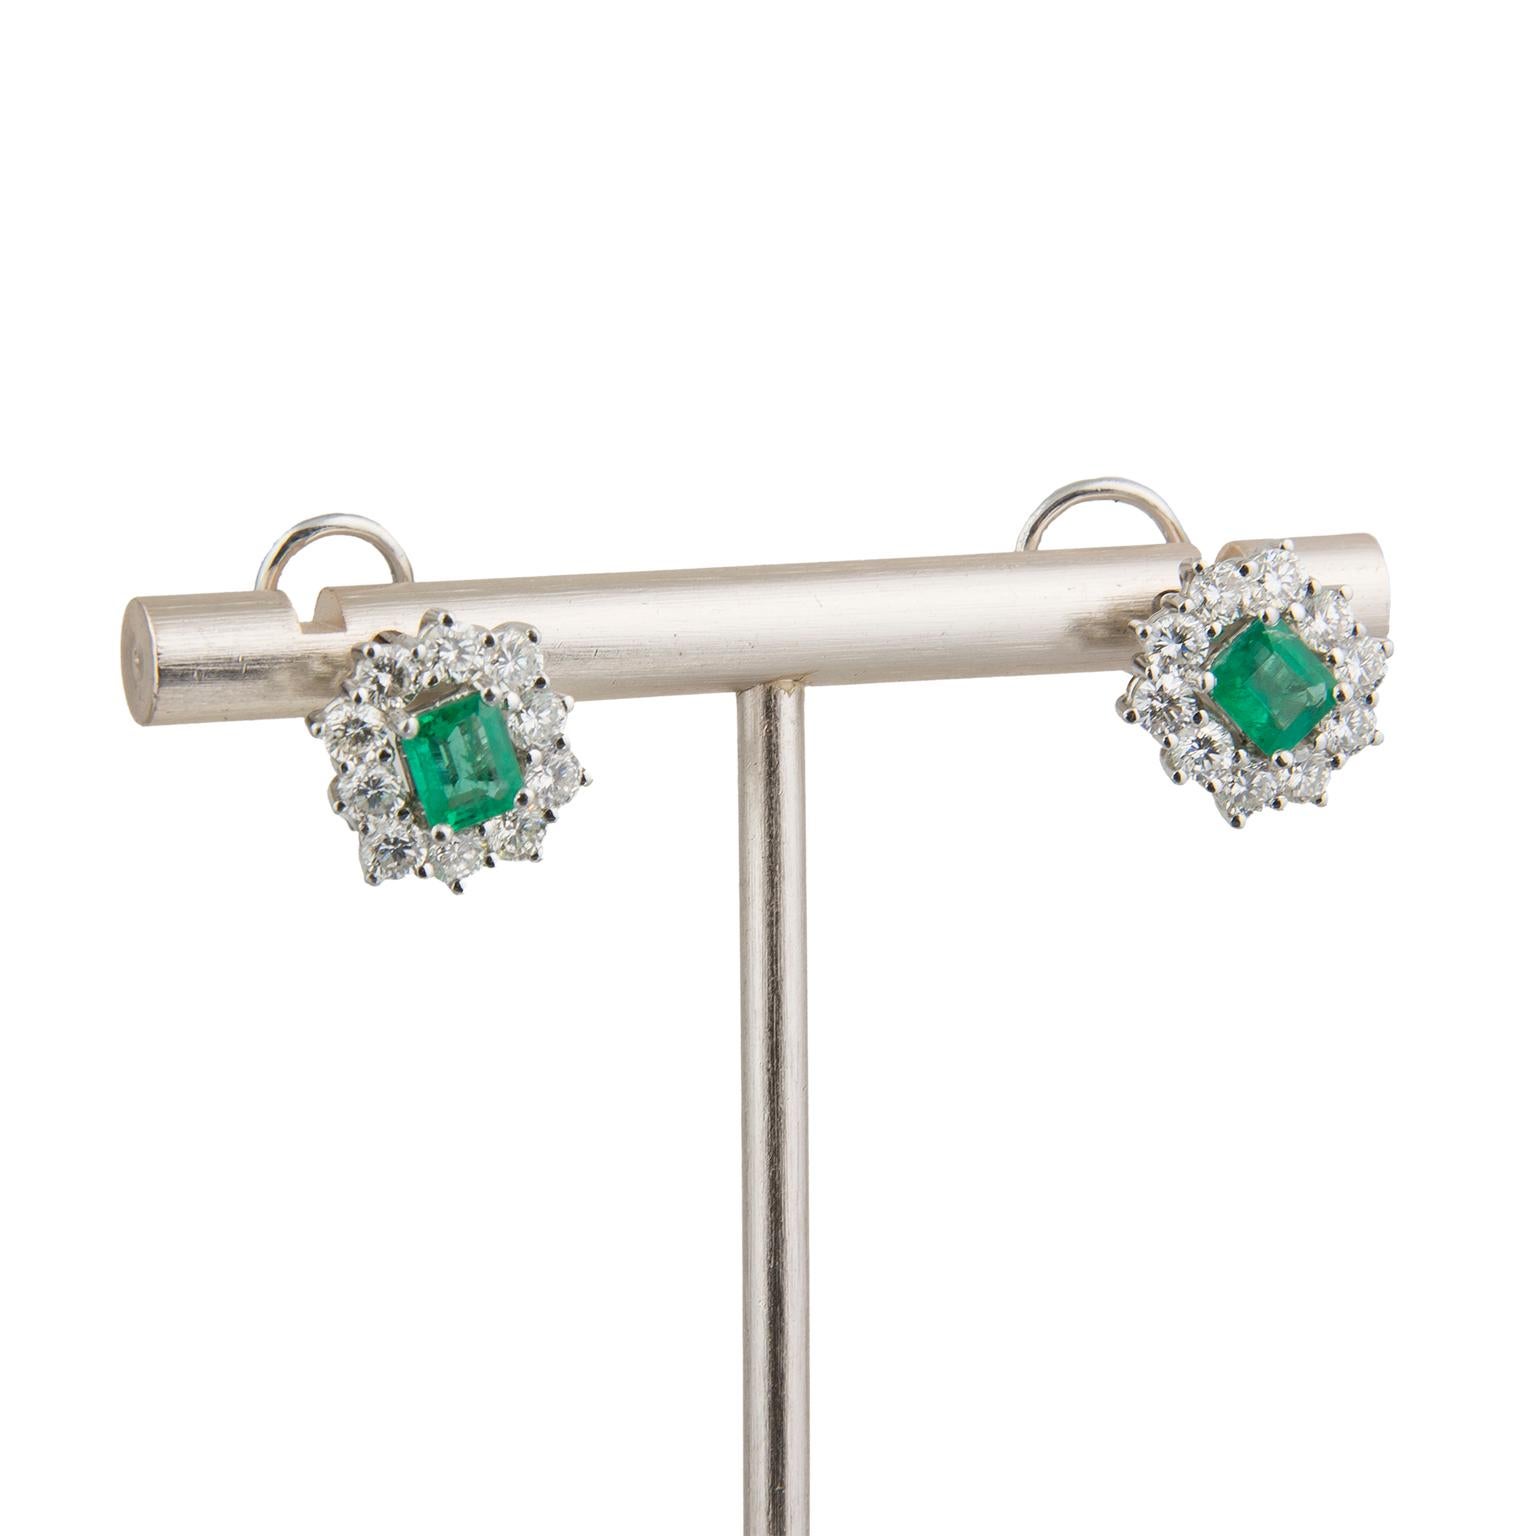 Earrings in 18 Karat white gold centered by two emeralds, surrounded by 24 round brilliant cut diamonds totalling 1.40 carats in weight.
Diameter: 1.3 cm (0.51 in)